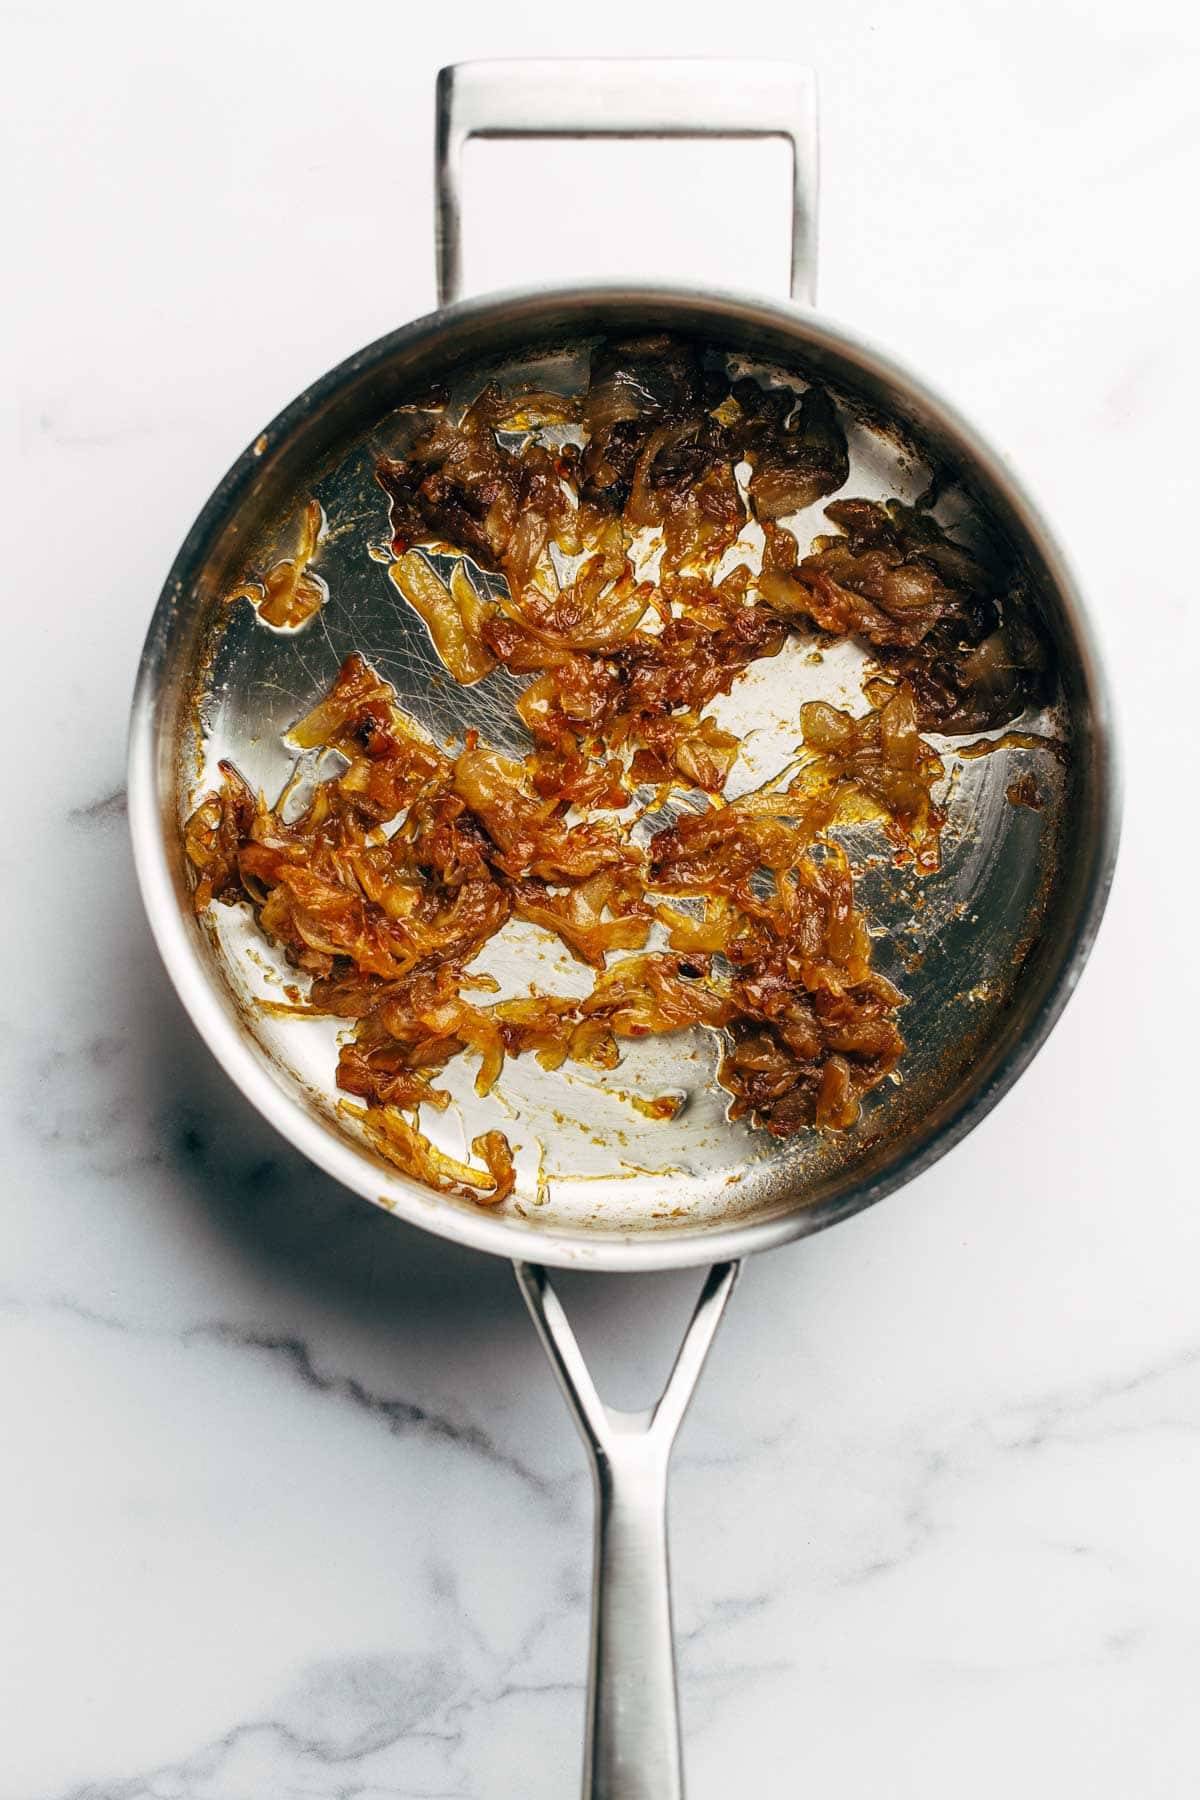 Caramelized onions in pan.